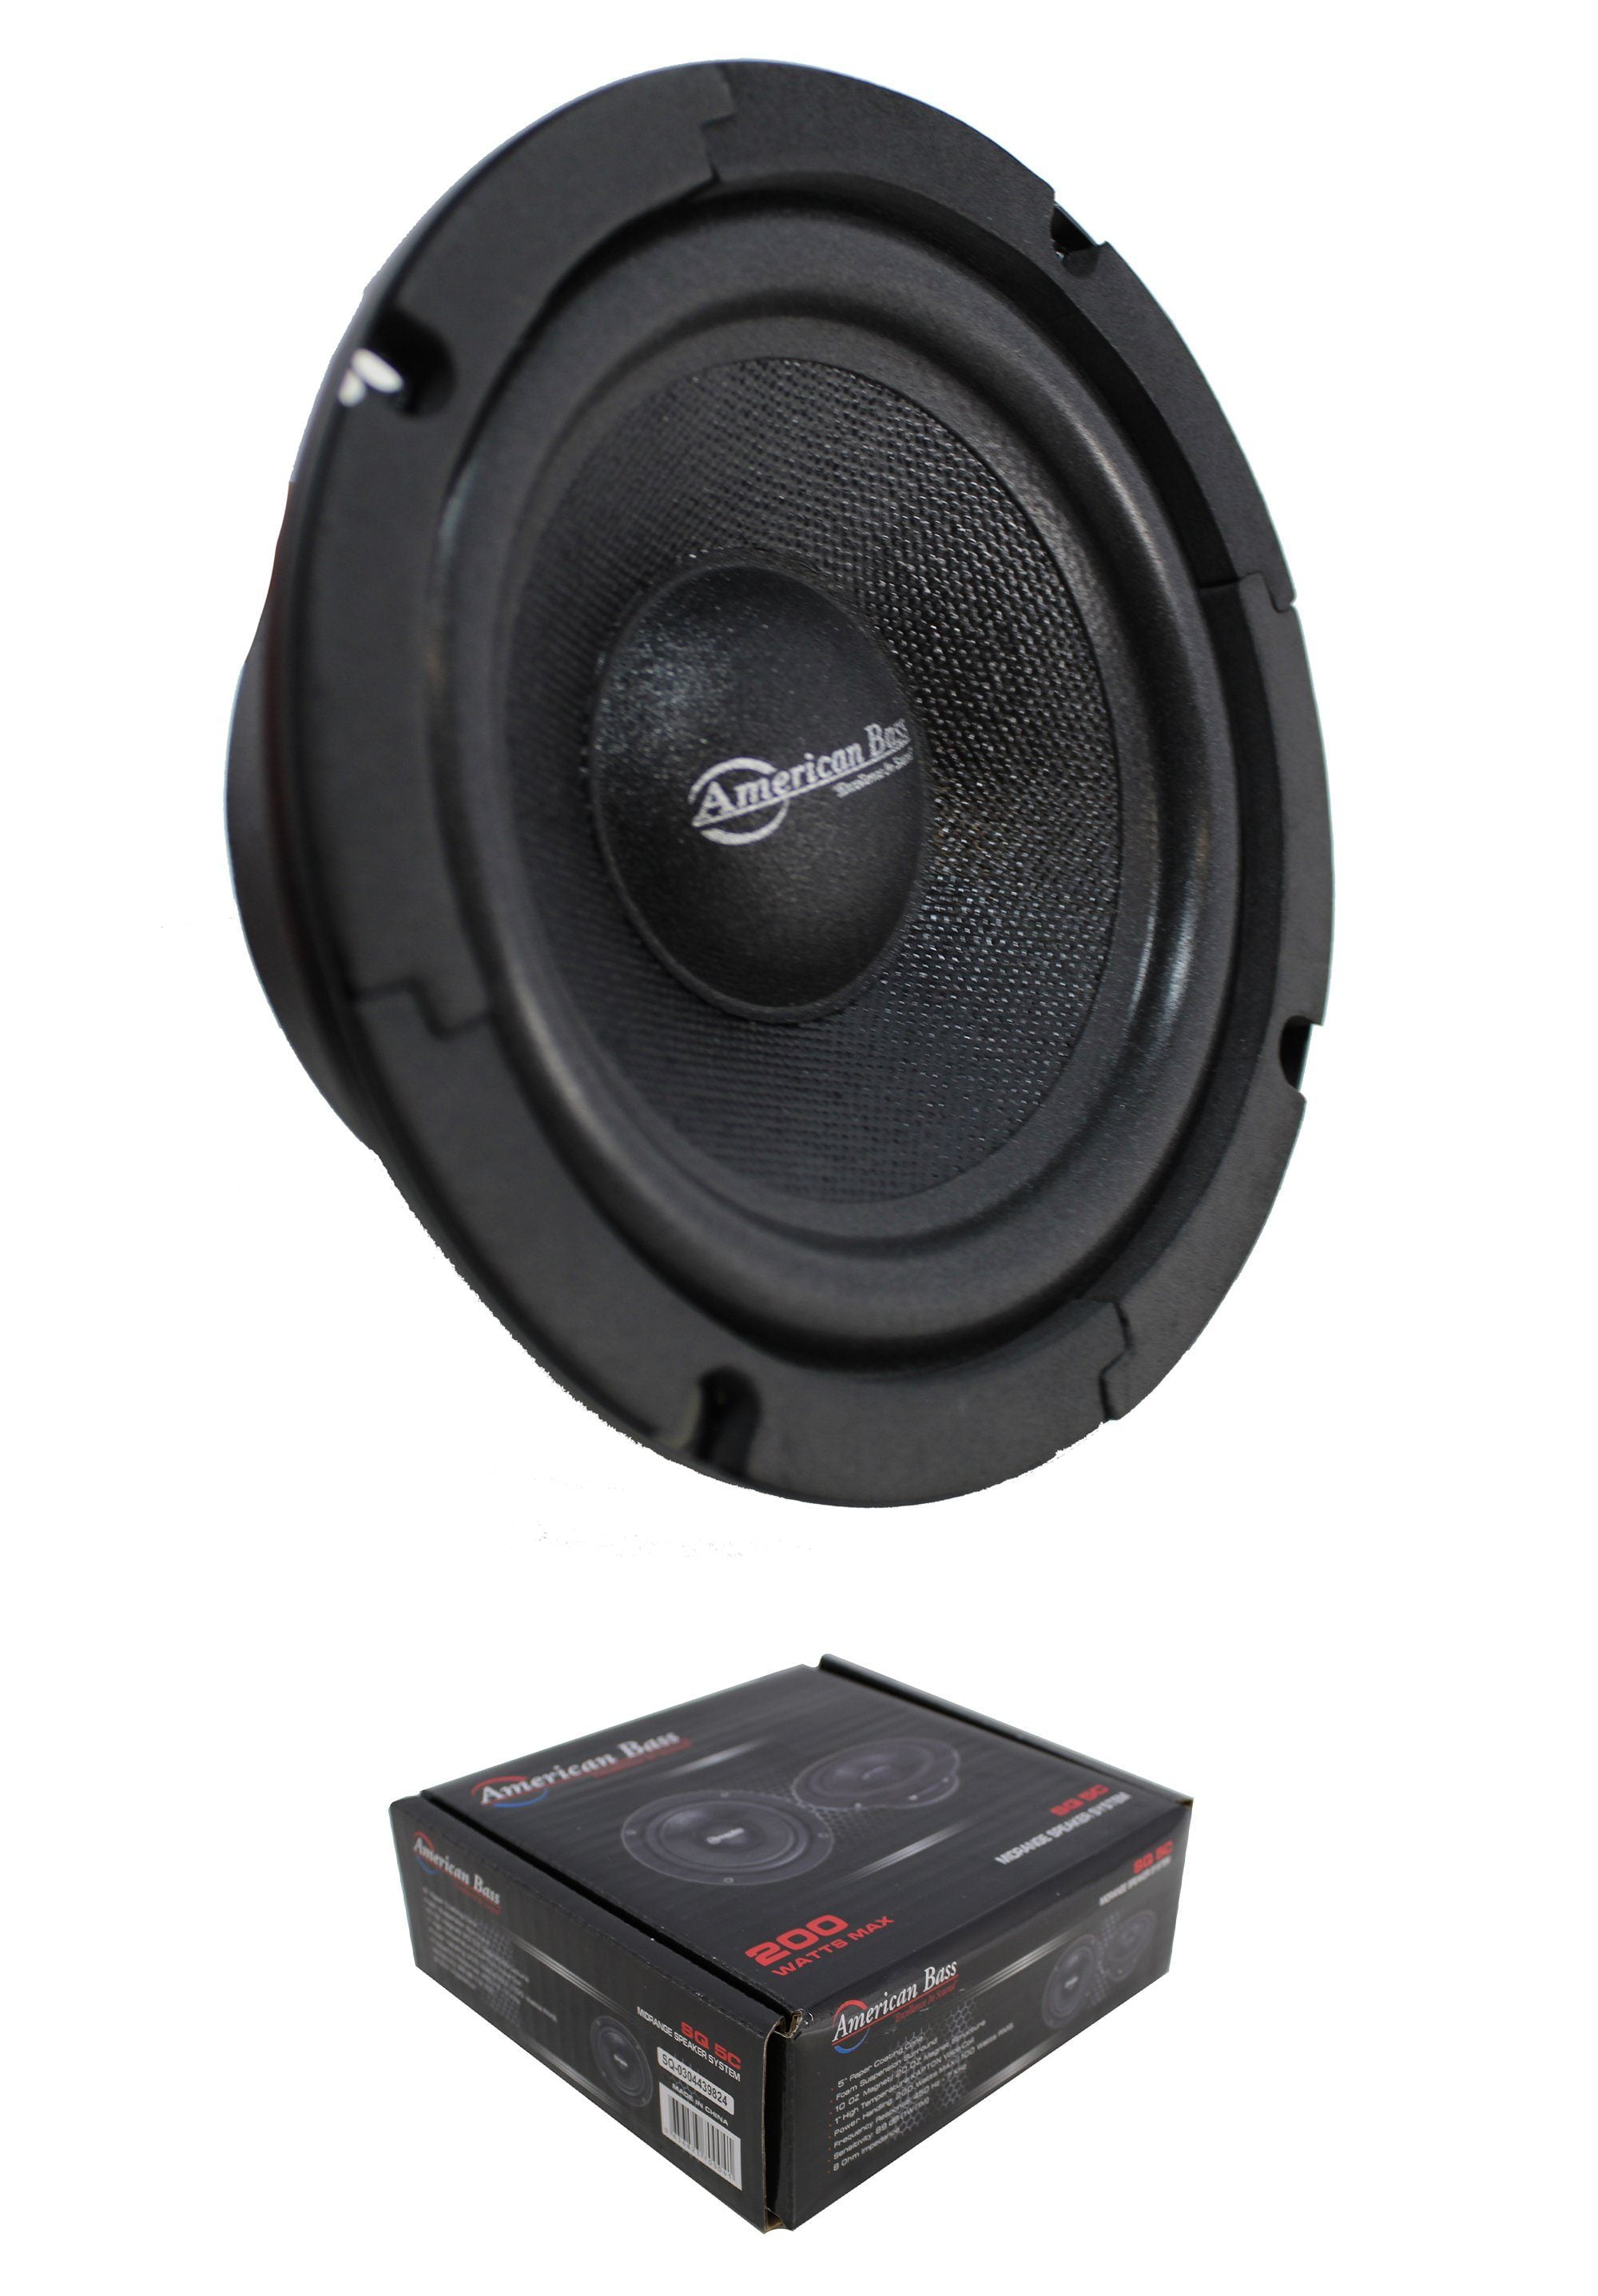 NEW 5.25" MidRange Speaker.Home Audio Replacement.five inch.8ohm.Woofer.5-1/4. 